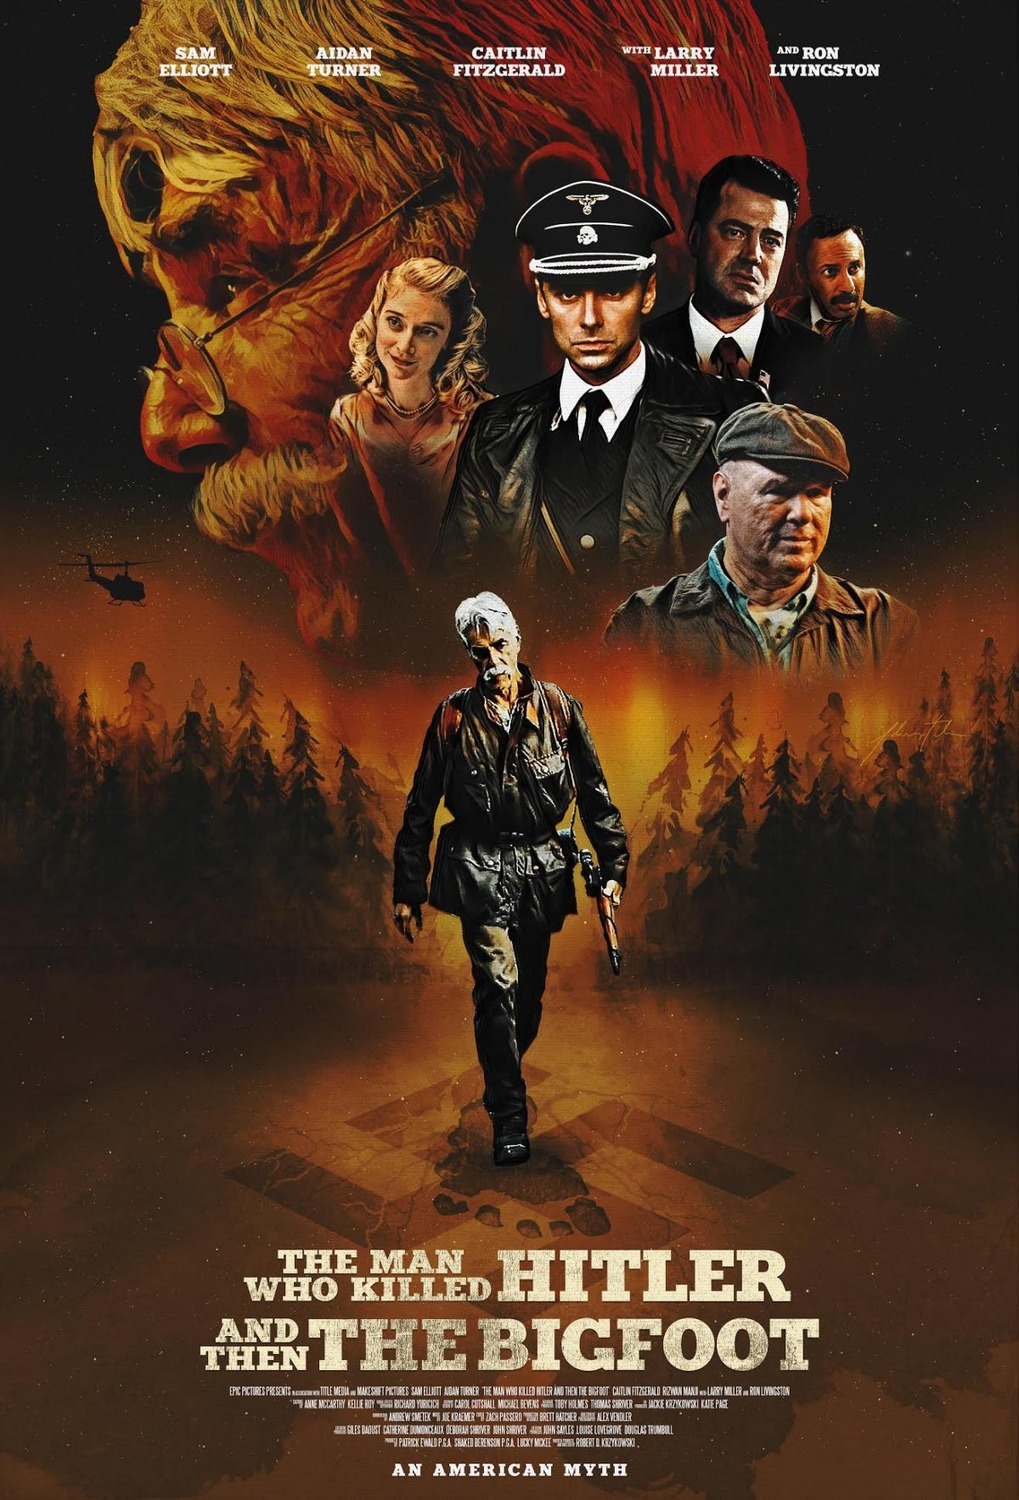 man who killed hitler and then bigfoot - Sam Elliott Aidan Turner Caitlin Fitzgerald With Larry Miller And Ron Livingston Whermaled Hitler Andthe Bigfoot Epe Pictures Prof I Le Mediawawestproses San Luit Aantire The Makiwa Killed Atler And Then The Begint